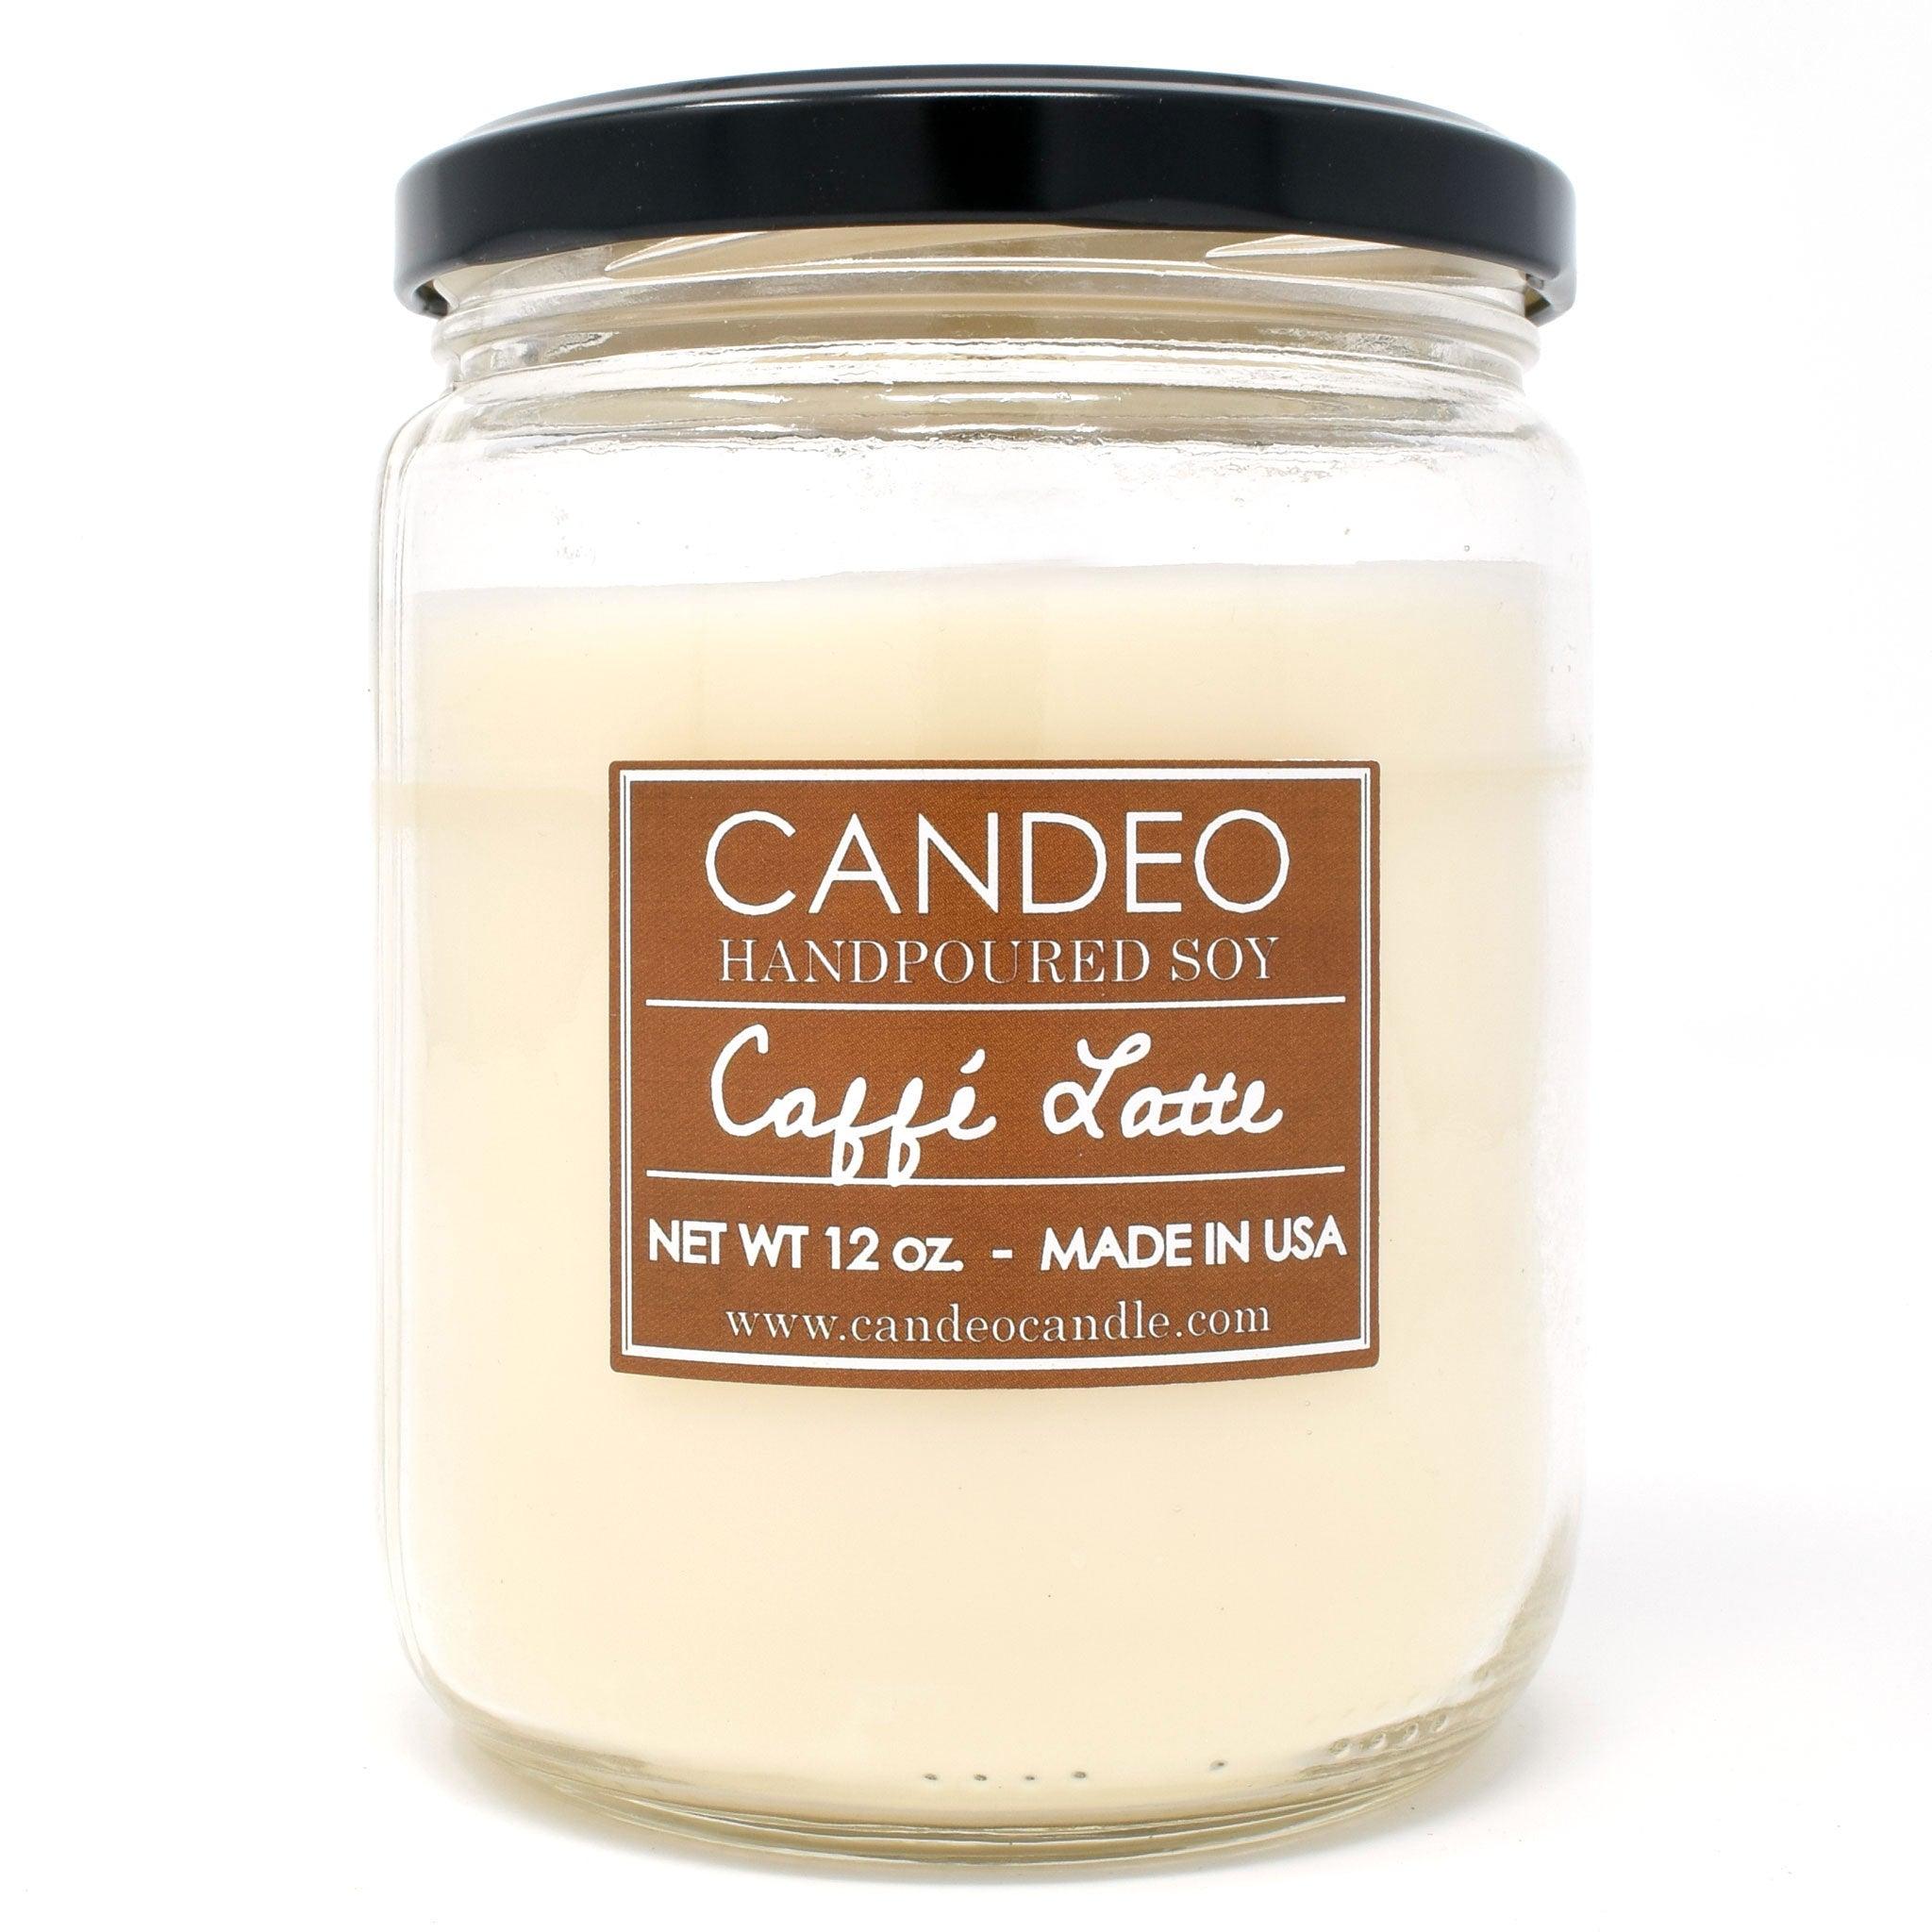 Caffe Latte, 14oz Soy Candle Jar - Candeo Candle